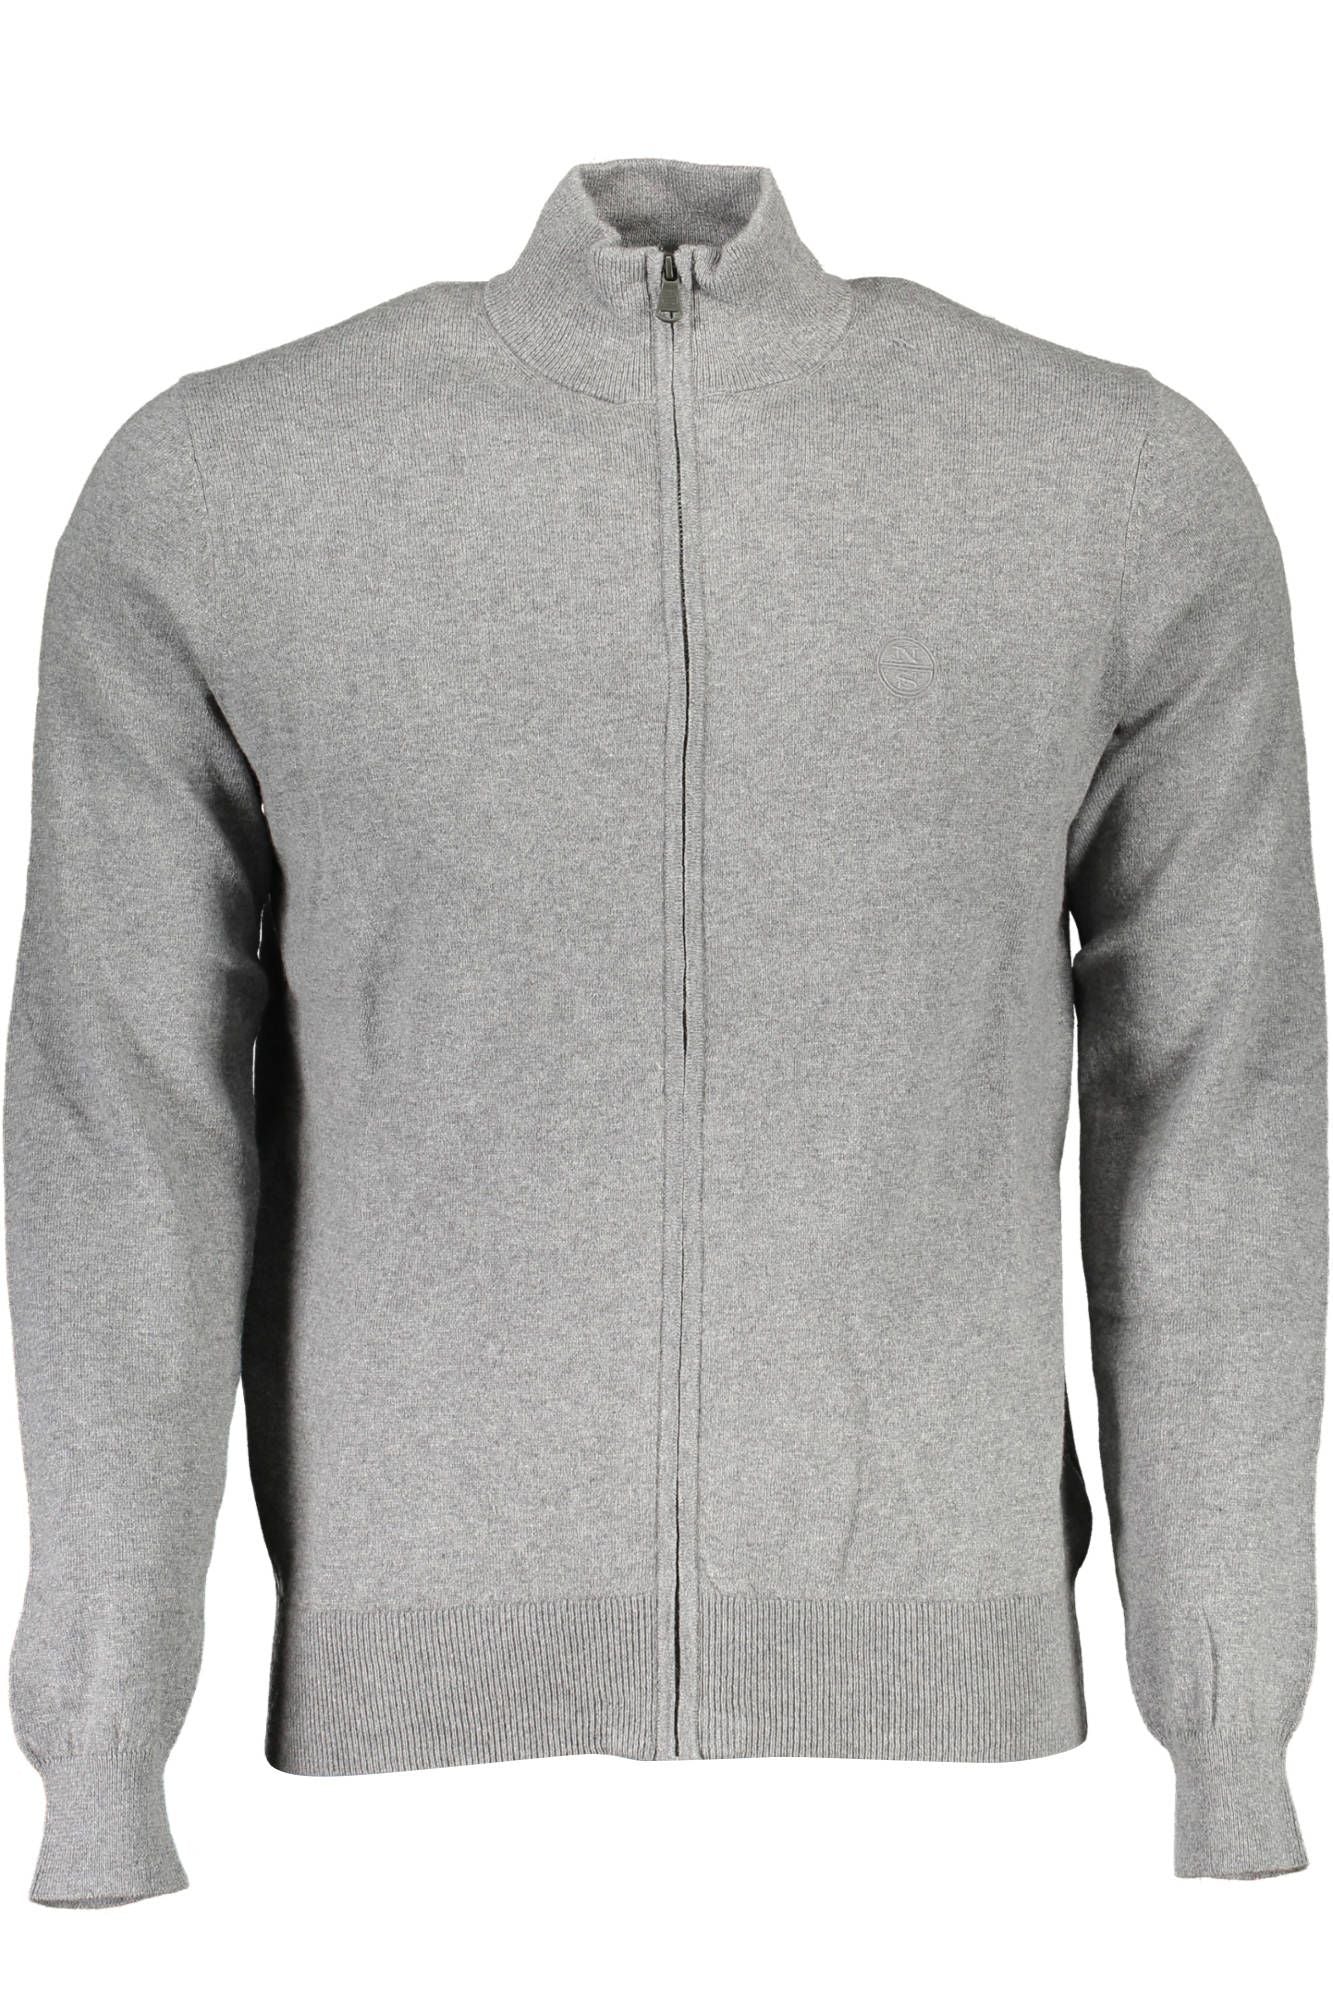 North Sails Sleek Gray Zip-Up Cardigan with Embroidered Logo